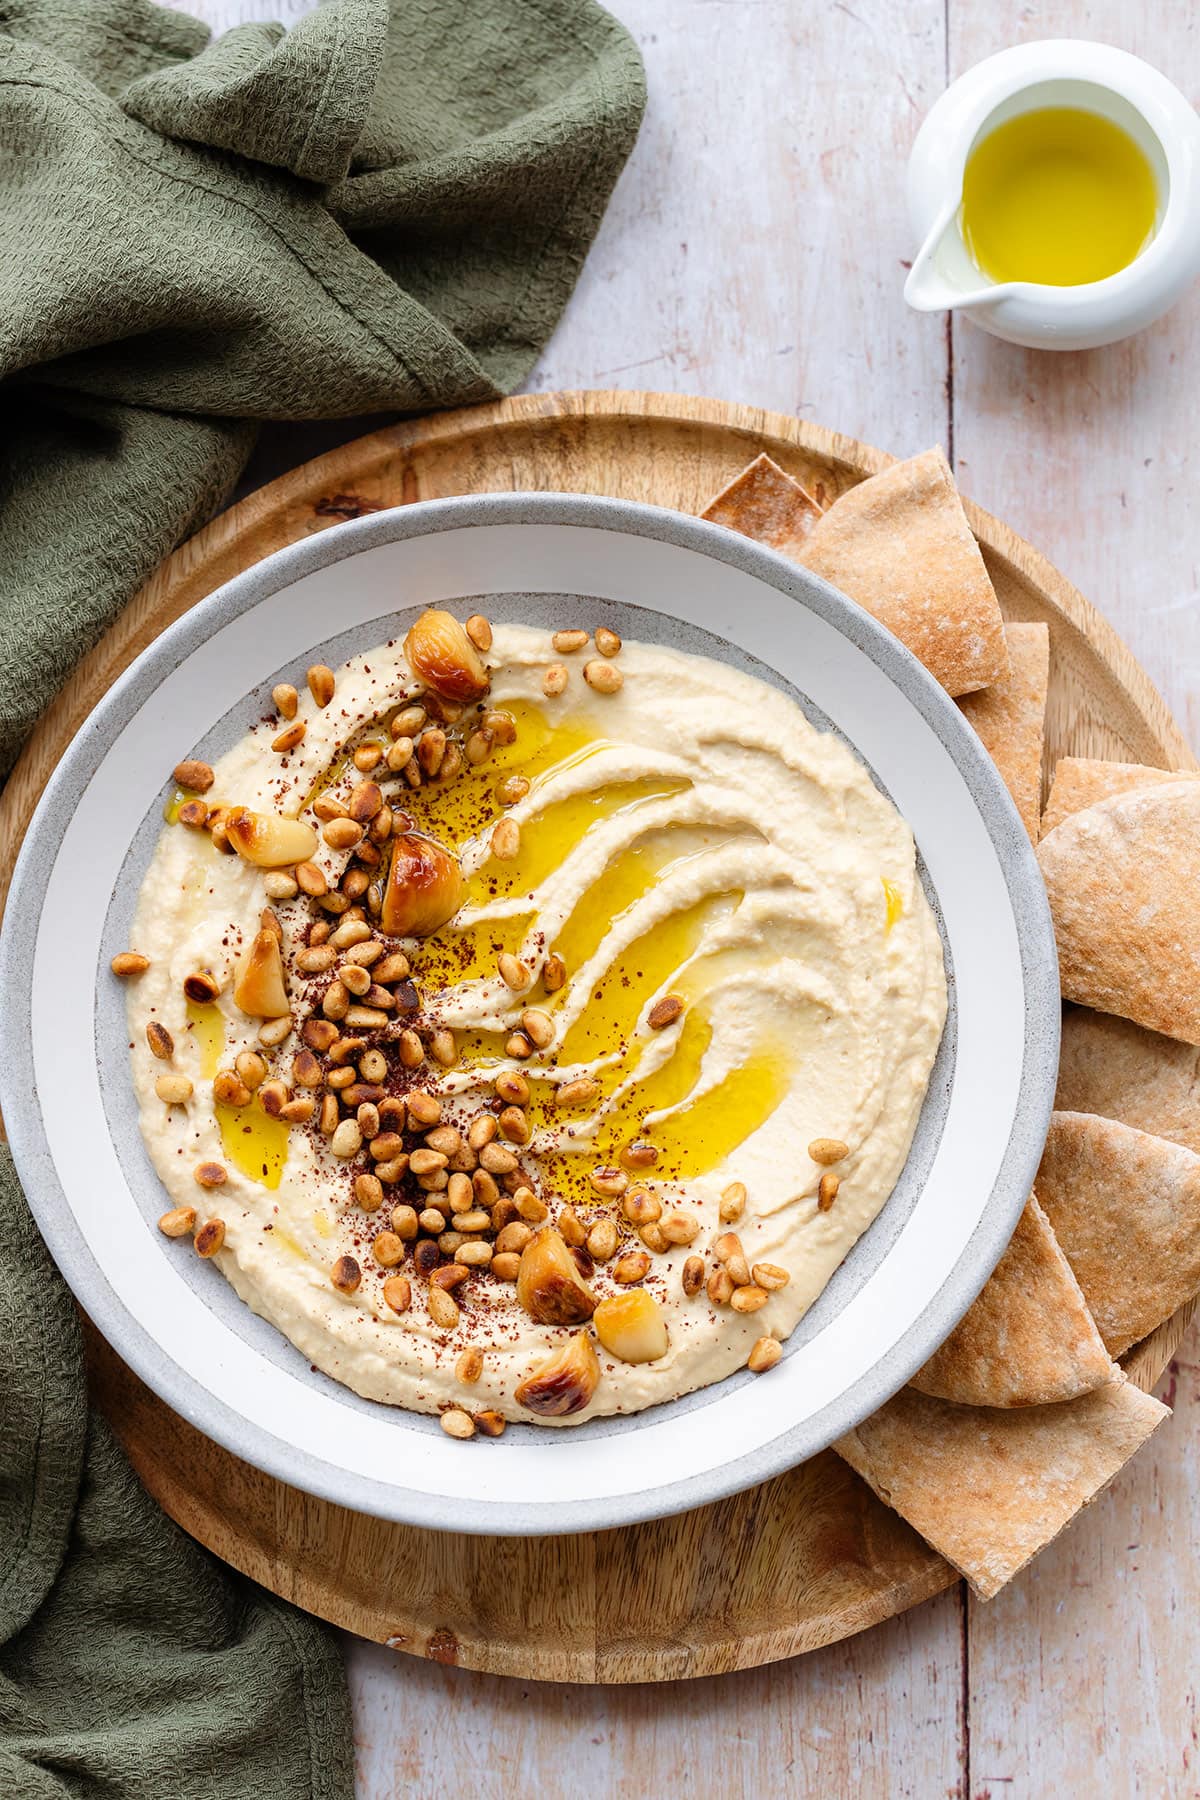 Hummus in a shallow grey bowl topped with pine nuts, roasted garlic, and olive oil.